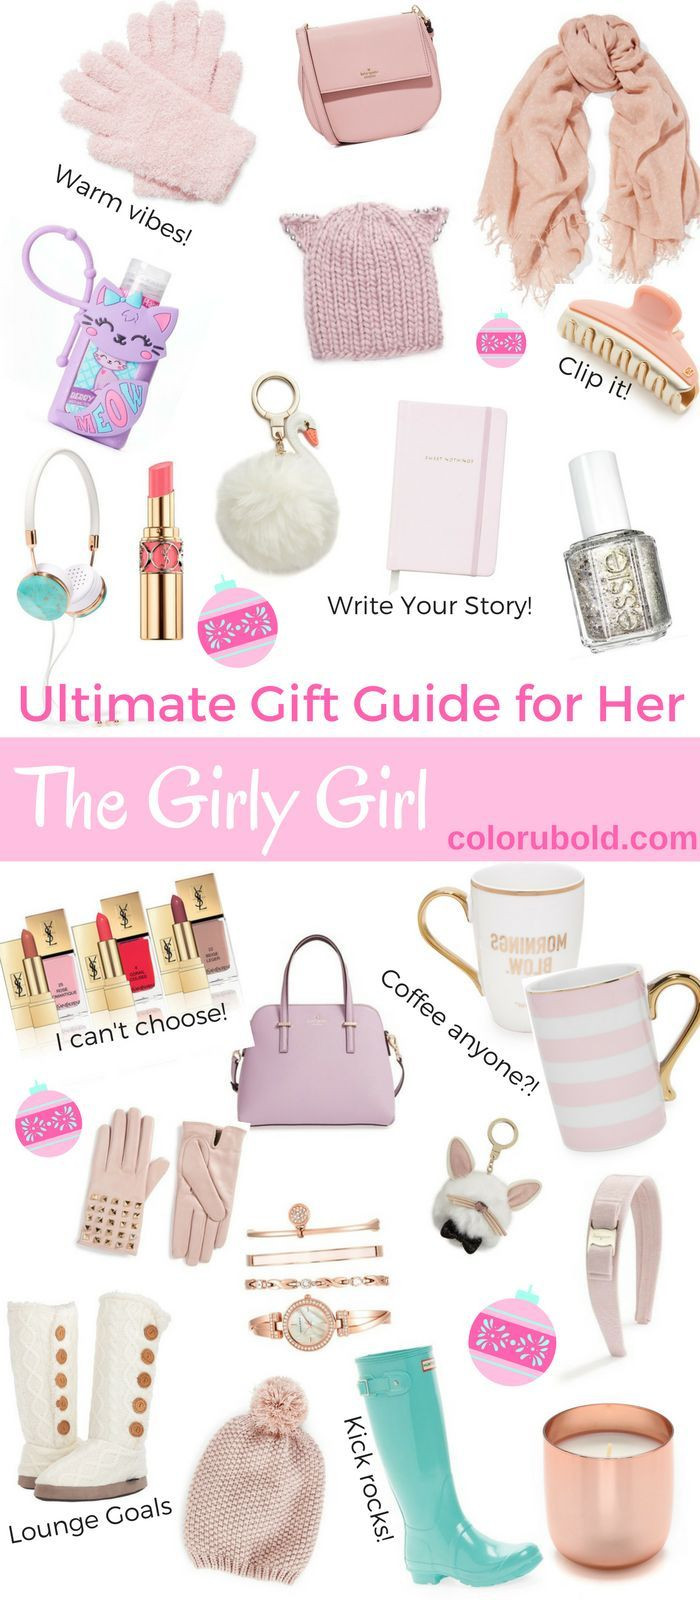 Birthday Gifts For A Teenage Girl
 The Ultimate Gift Guide for the Girly Girl